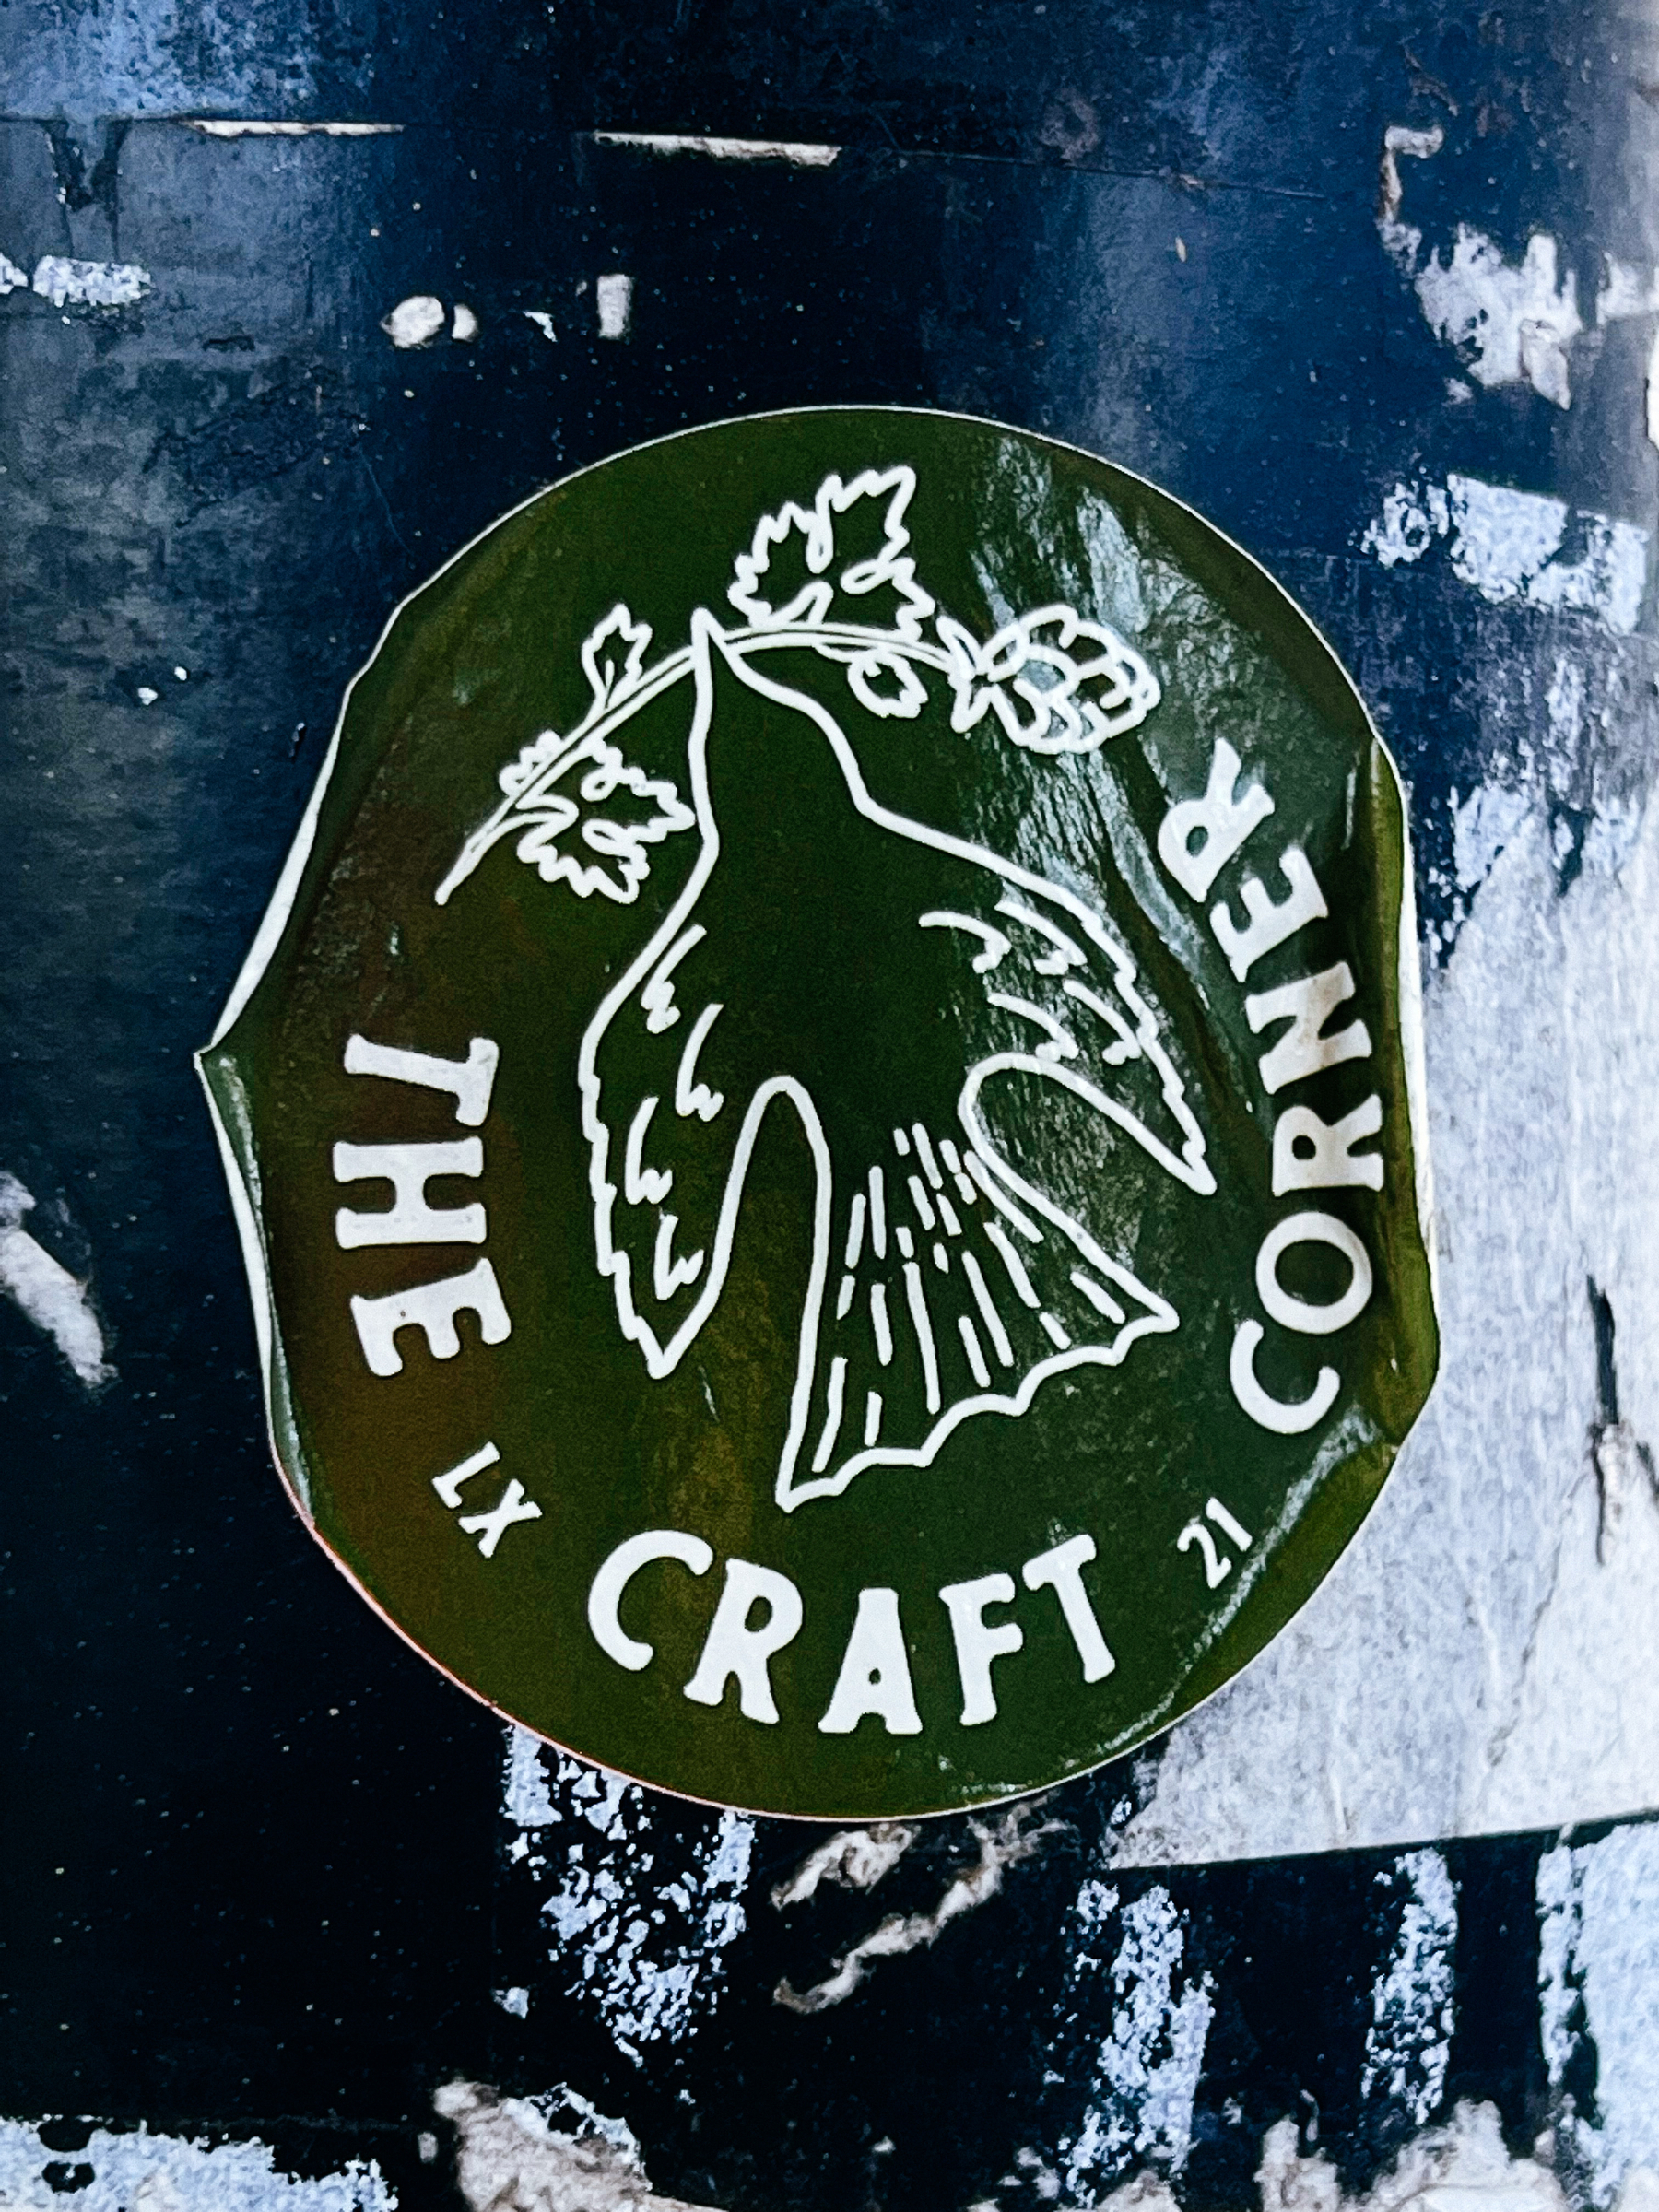 Sticker of a bird flying with a branch on the beak, and the words “The Craft Corner”.